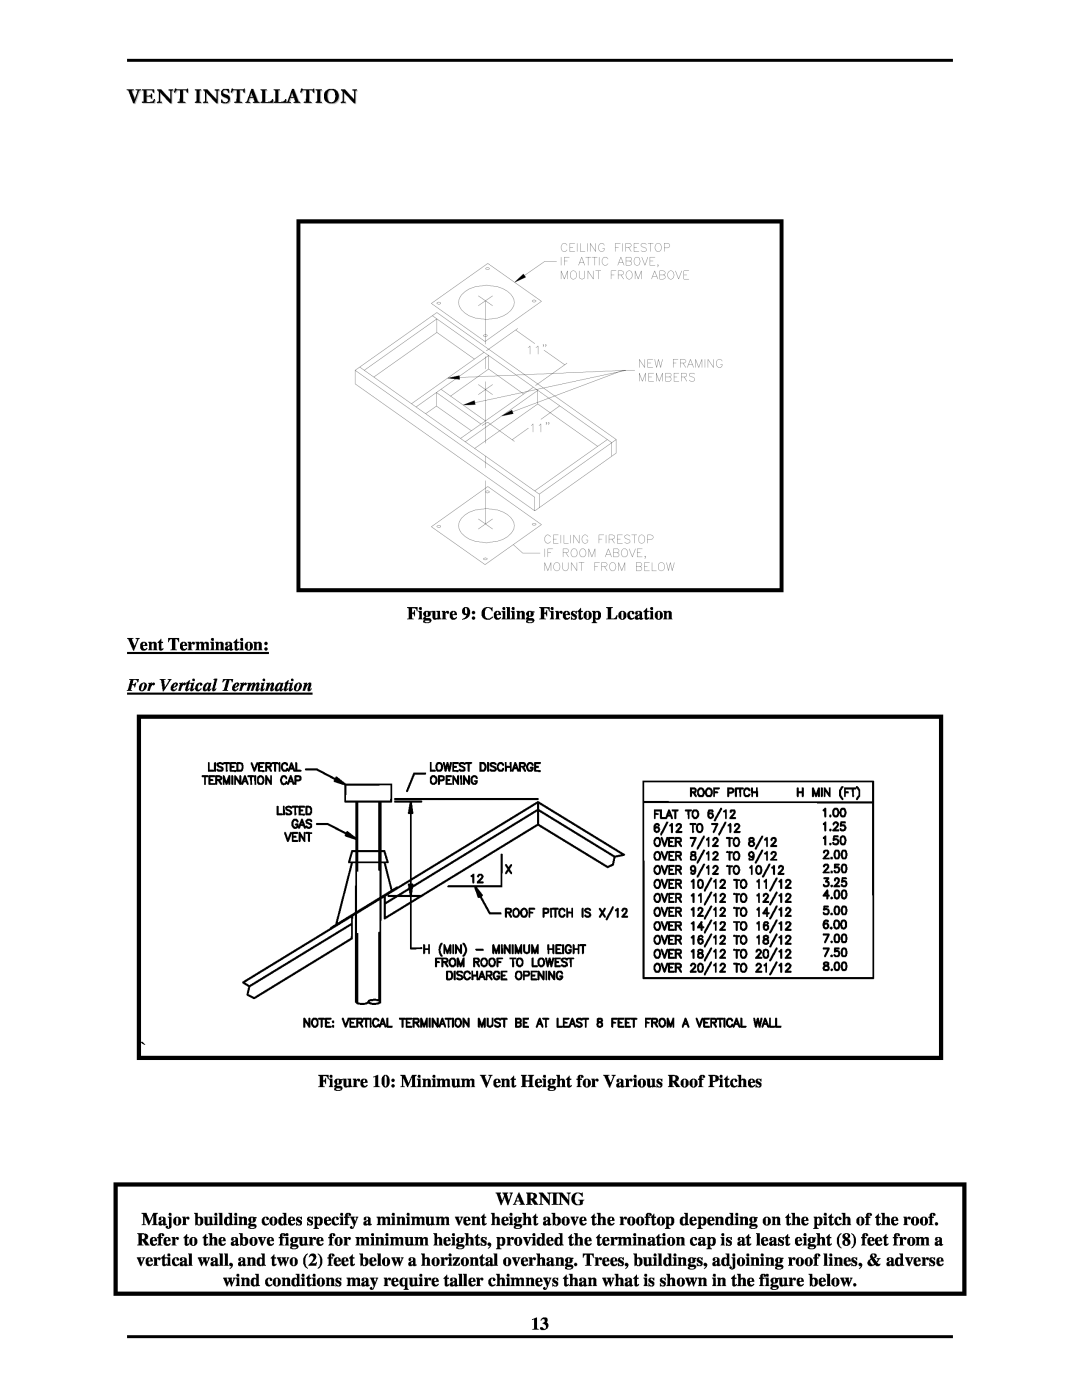 Monessen Hearth 7000 Series operating instructions Vent Installation, Ceiling Firestop Location, For Vertical Termination 